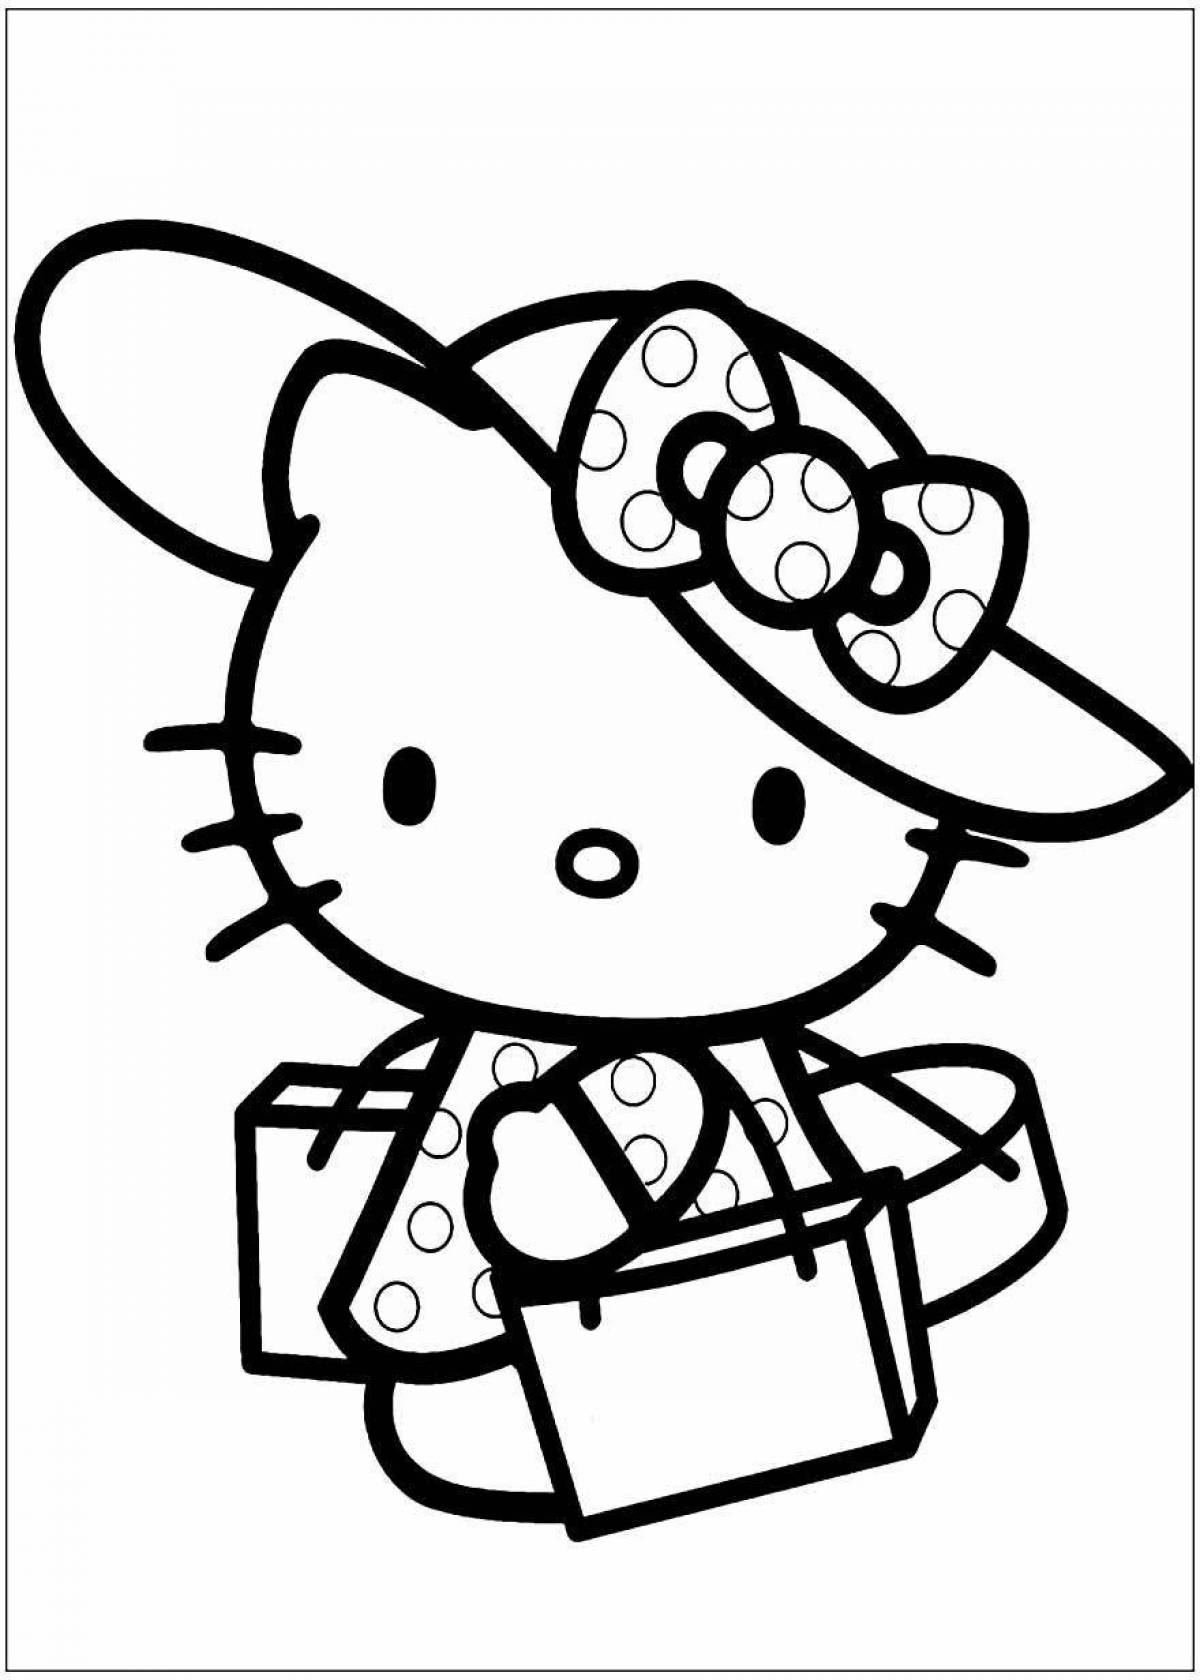 Colorful hello kitty head coloring page